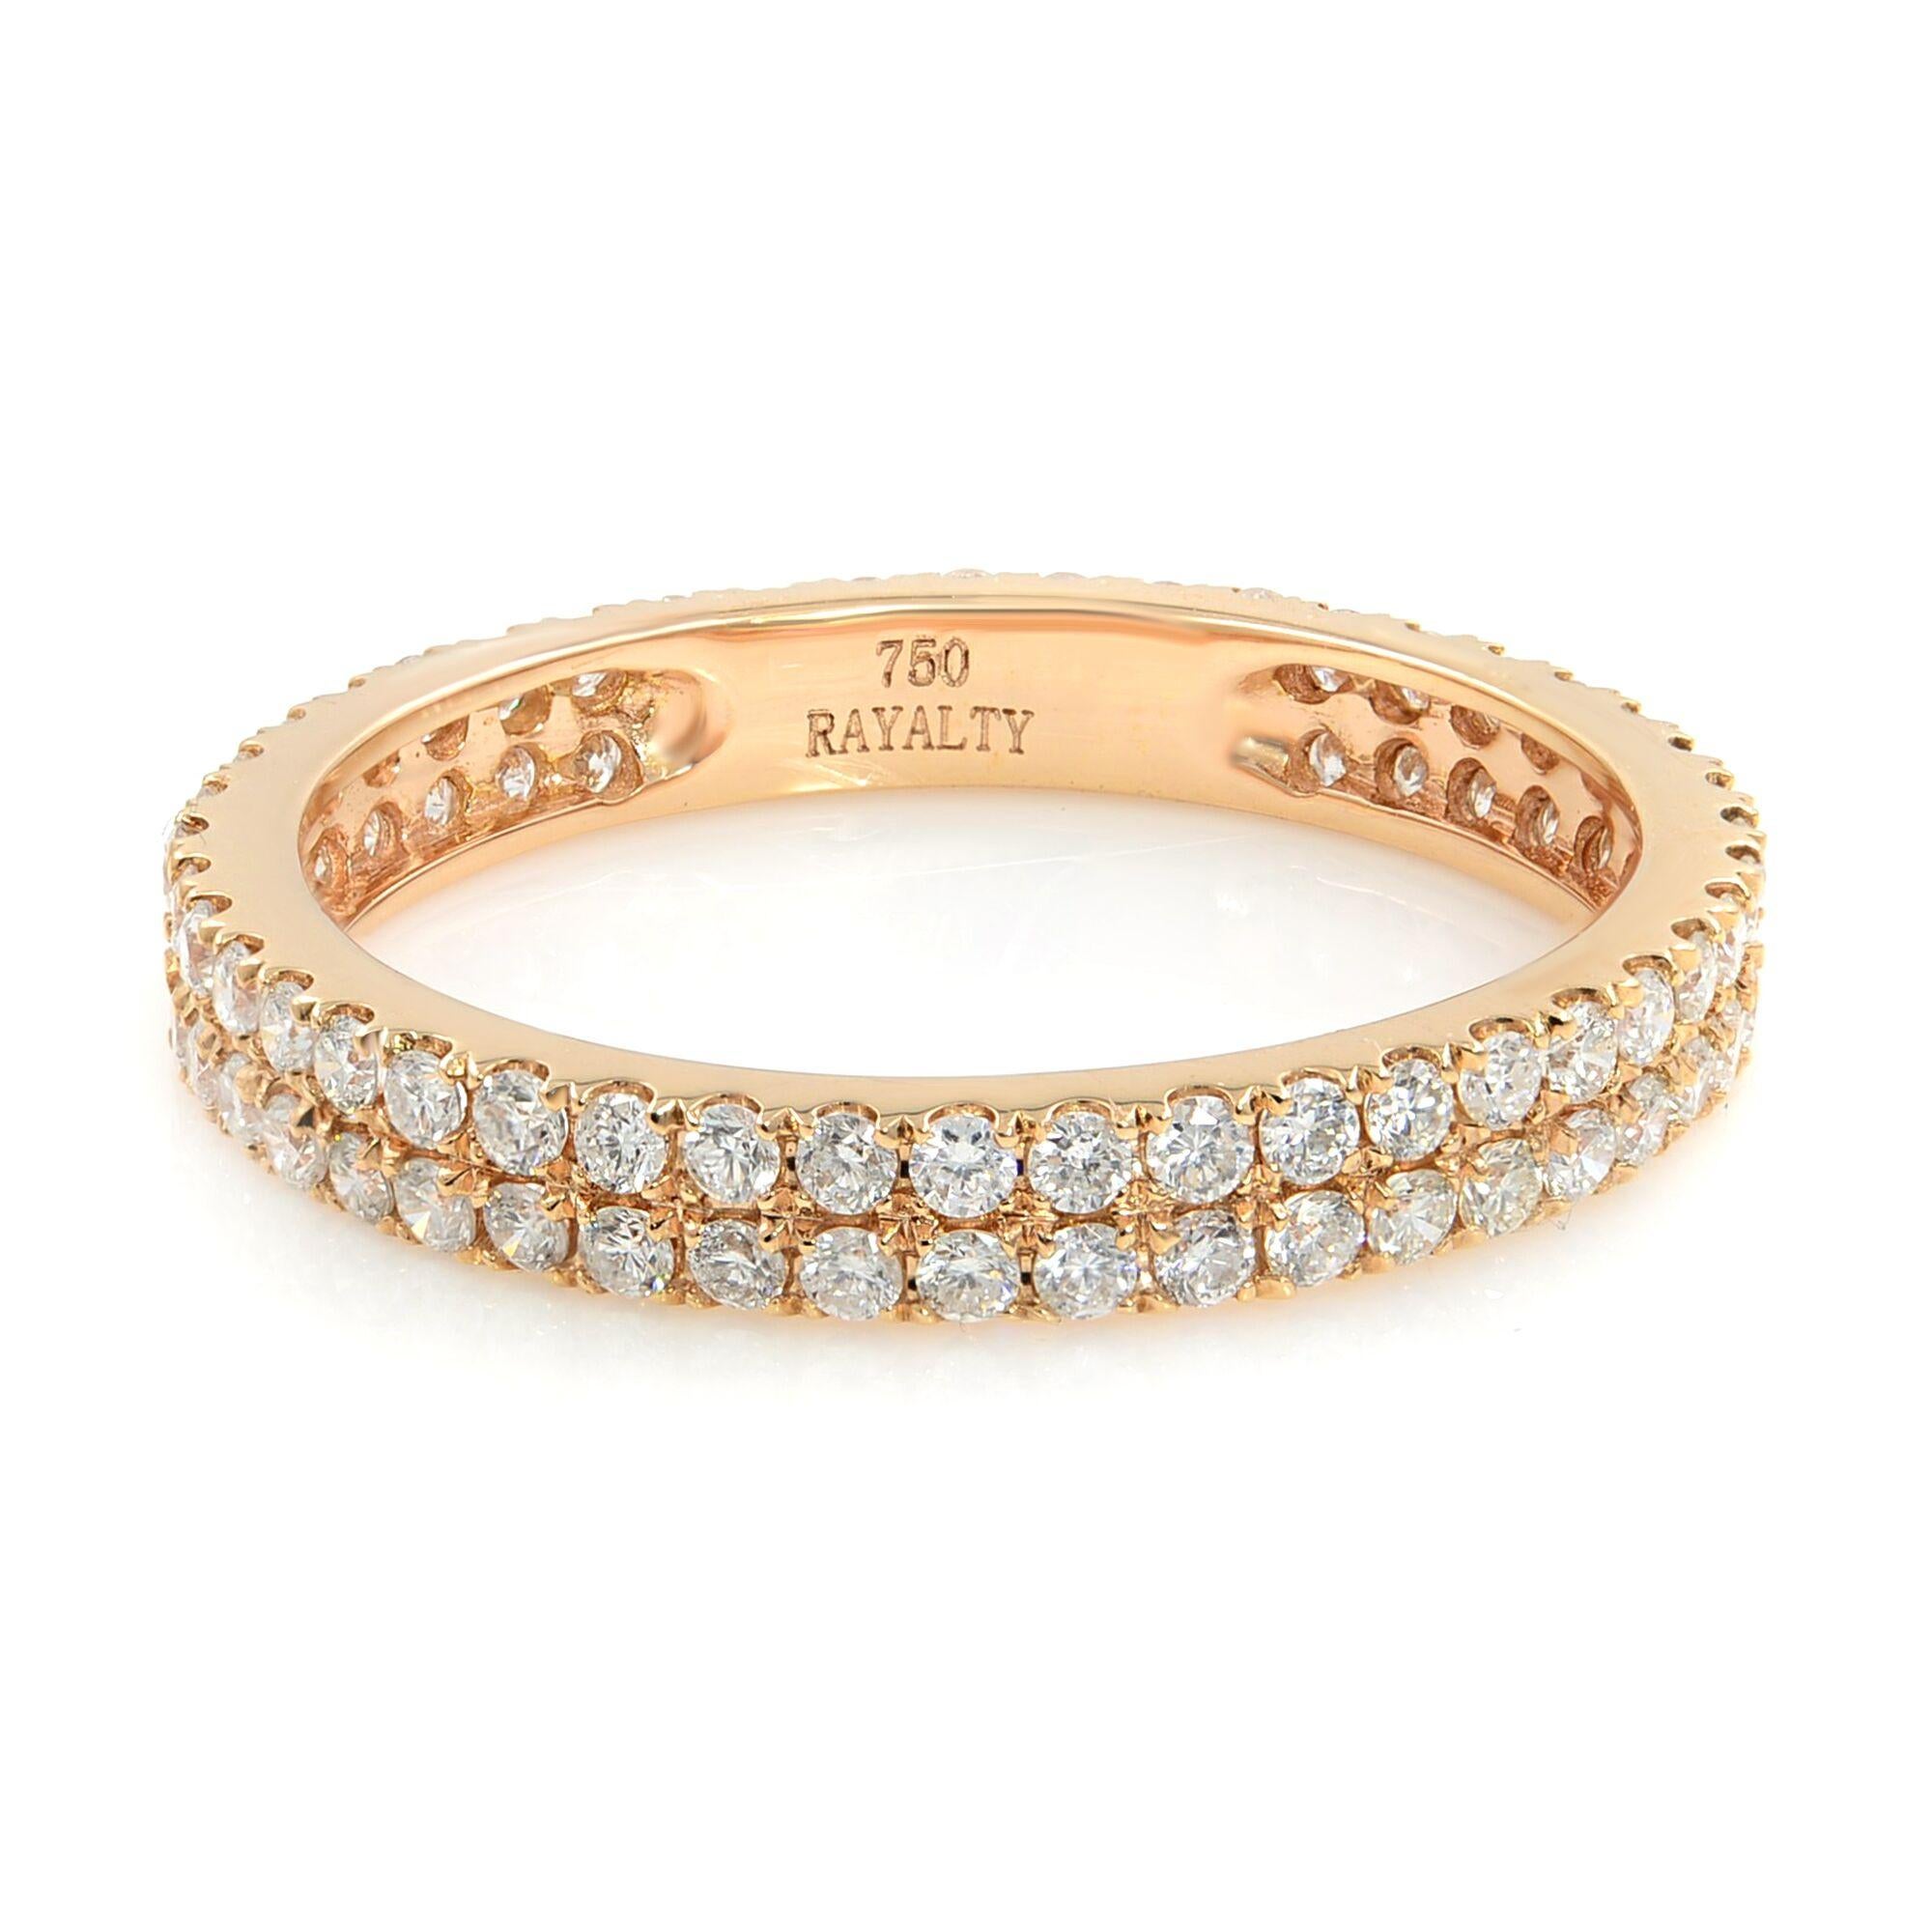 Brand New
Double Row Scoop Micro Pave Round Diamond Eternity Band 18K Rose Gold 0.61cts
Size: 5.25 
Weight: 1.4 grams